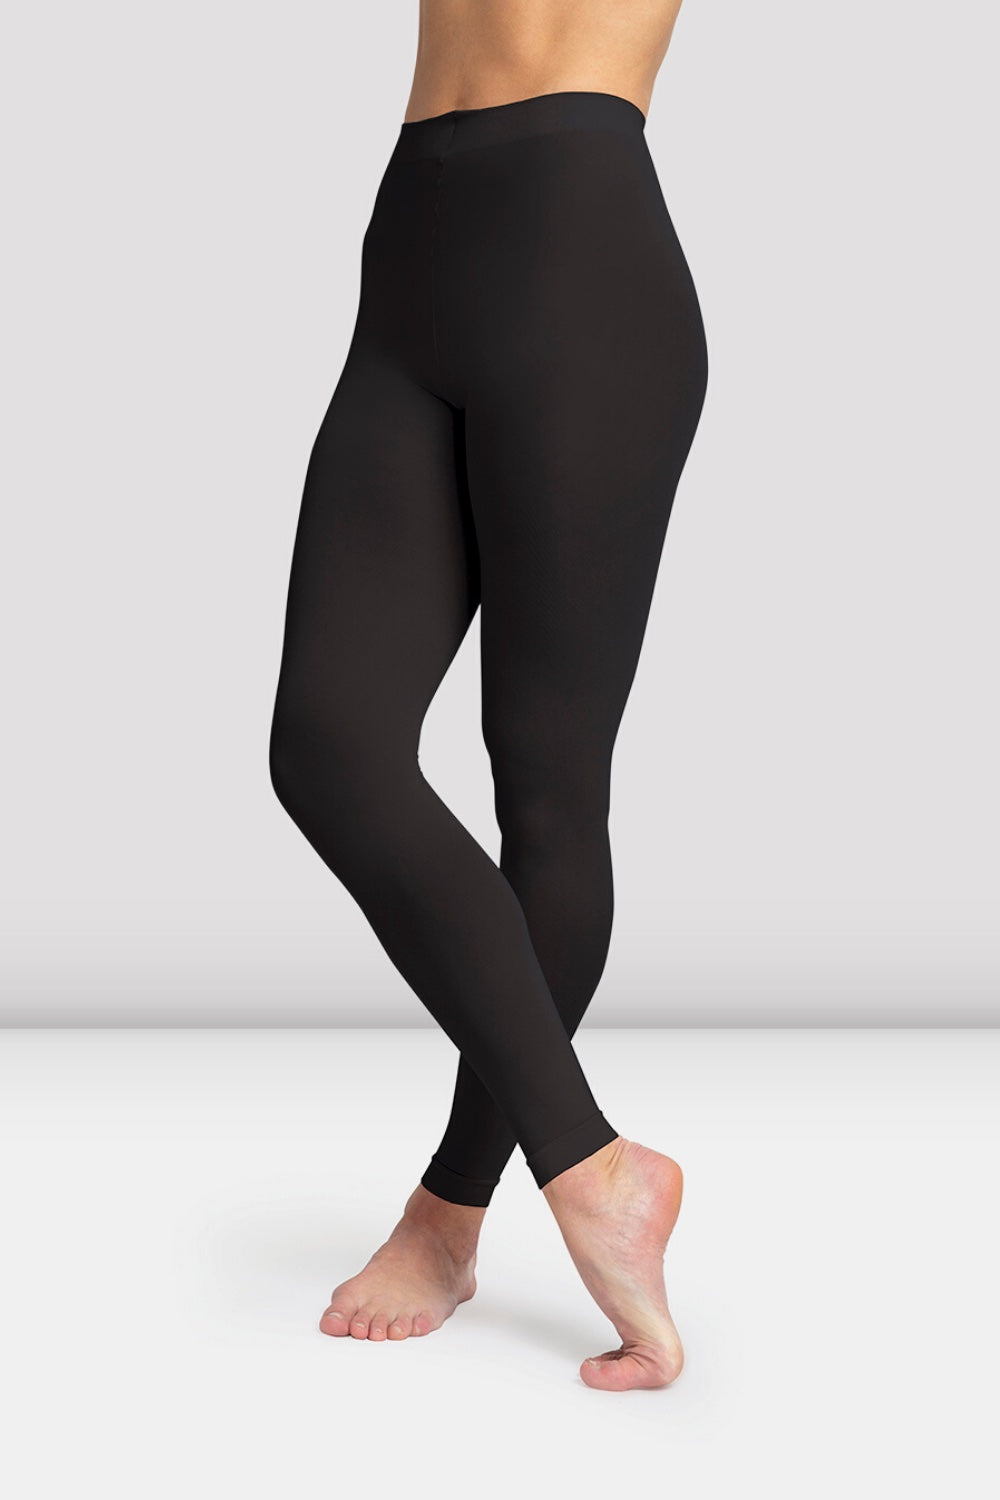 Bloch Contoursoft Footless Tights T0985 Made by Bloch (Style # T0985G)